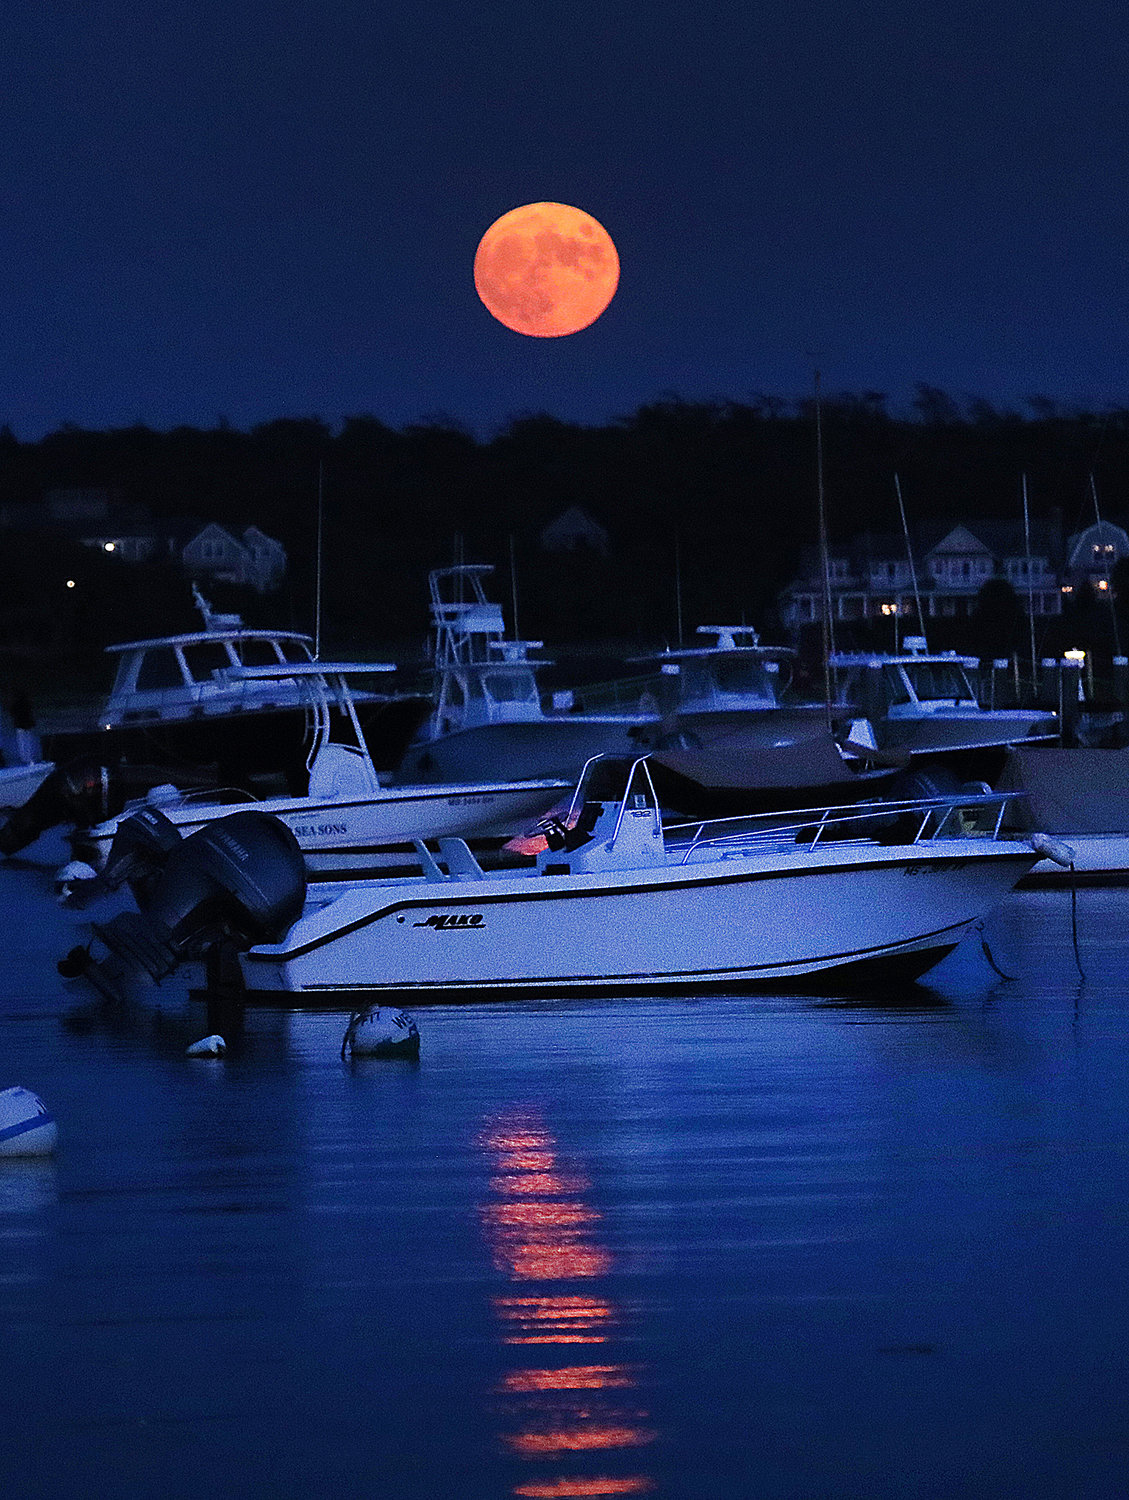 The full moon rises over boats moored in the harbor on July 23. The July full moon is known as the Thunder Moon or the Buck Moon.